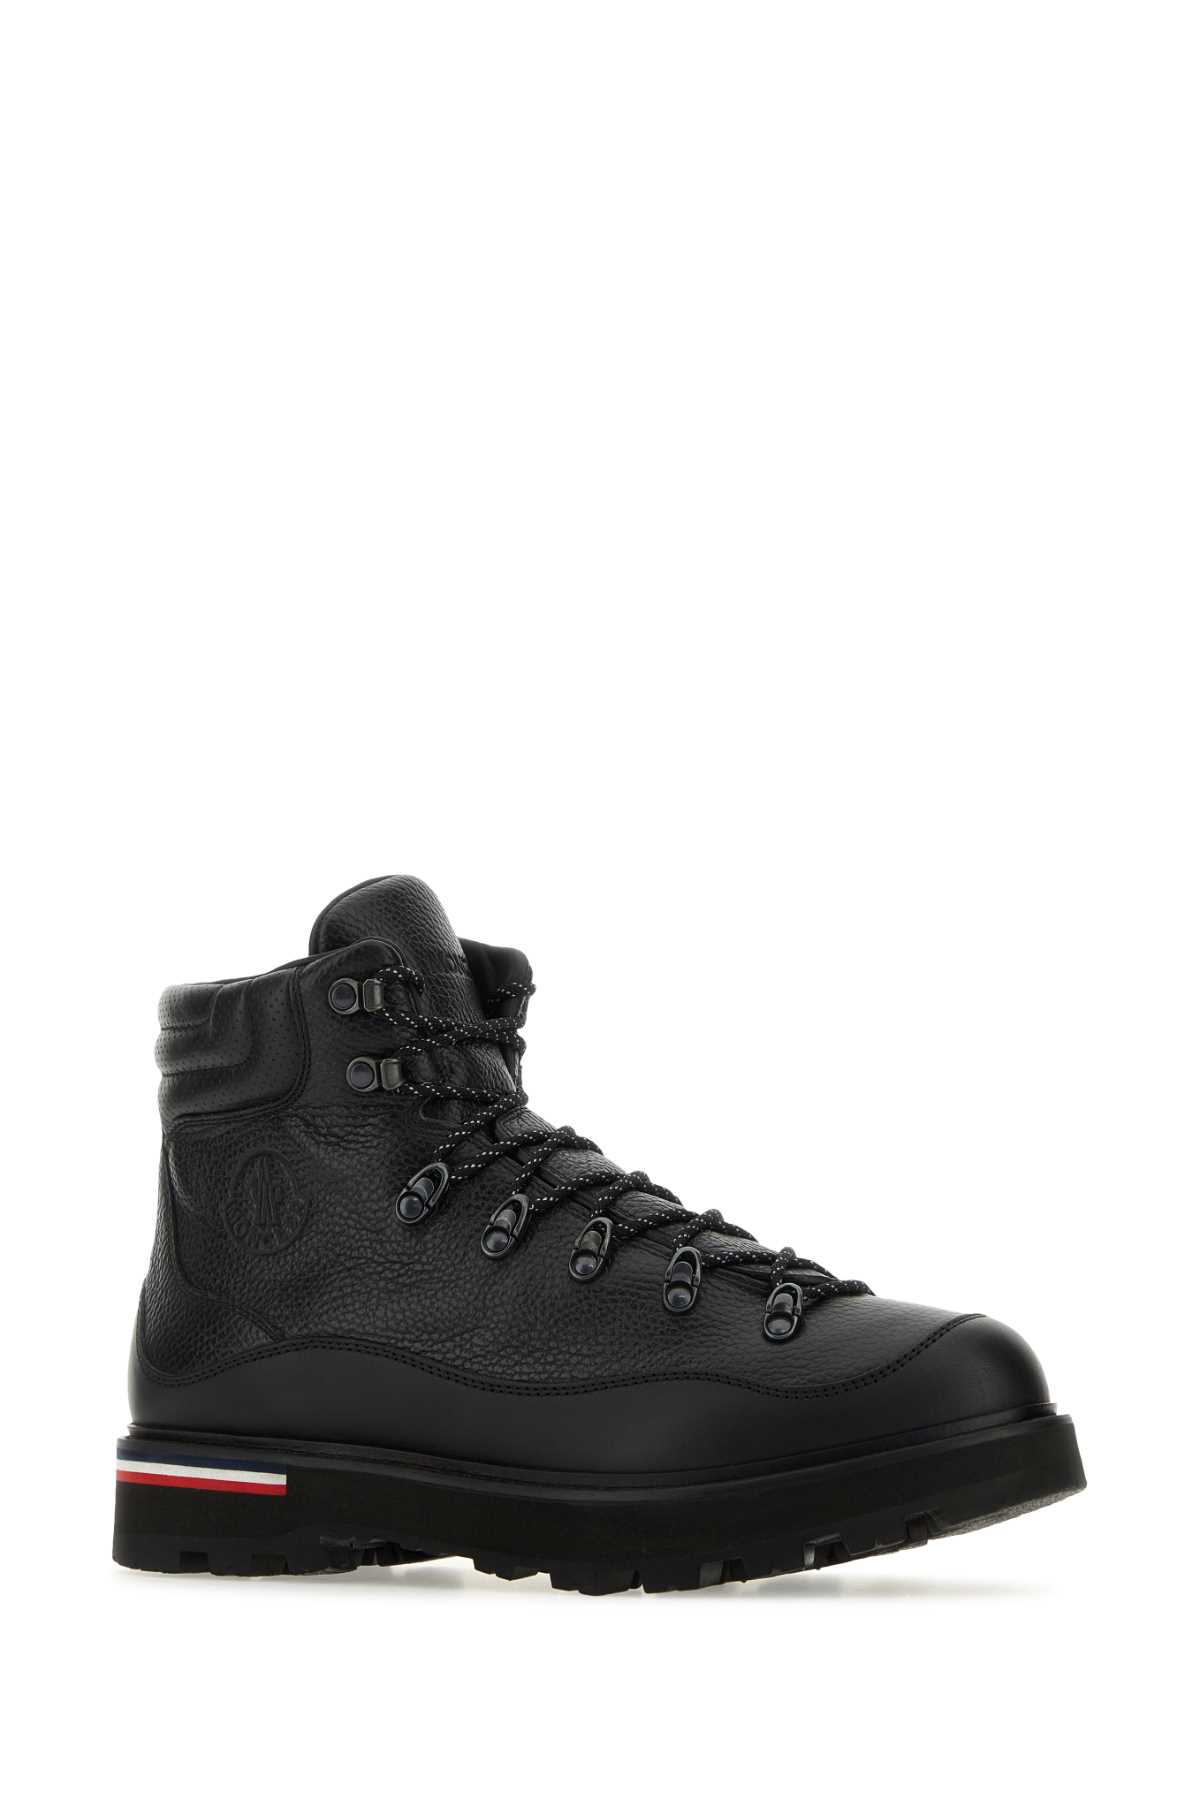 Shop Moncler Black Leather Peka Trek Ankle Boots In P97